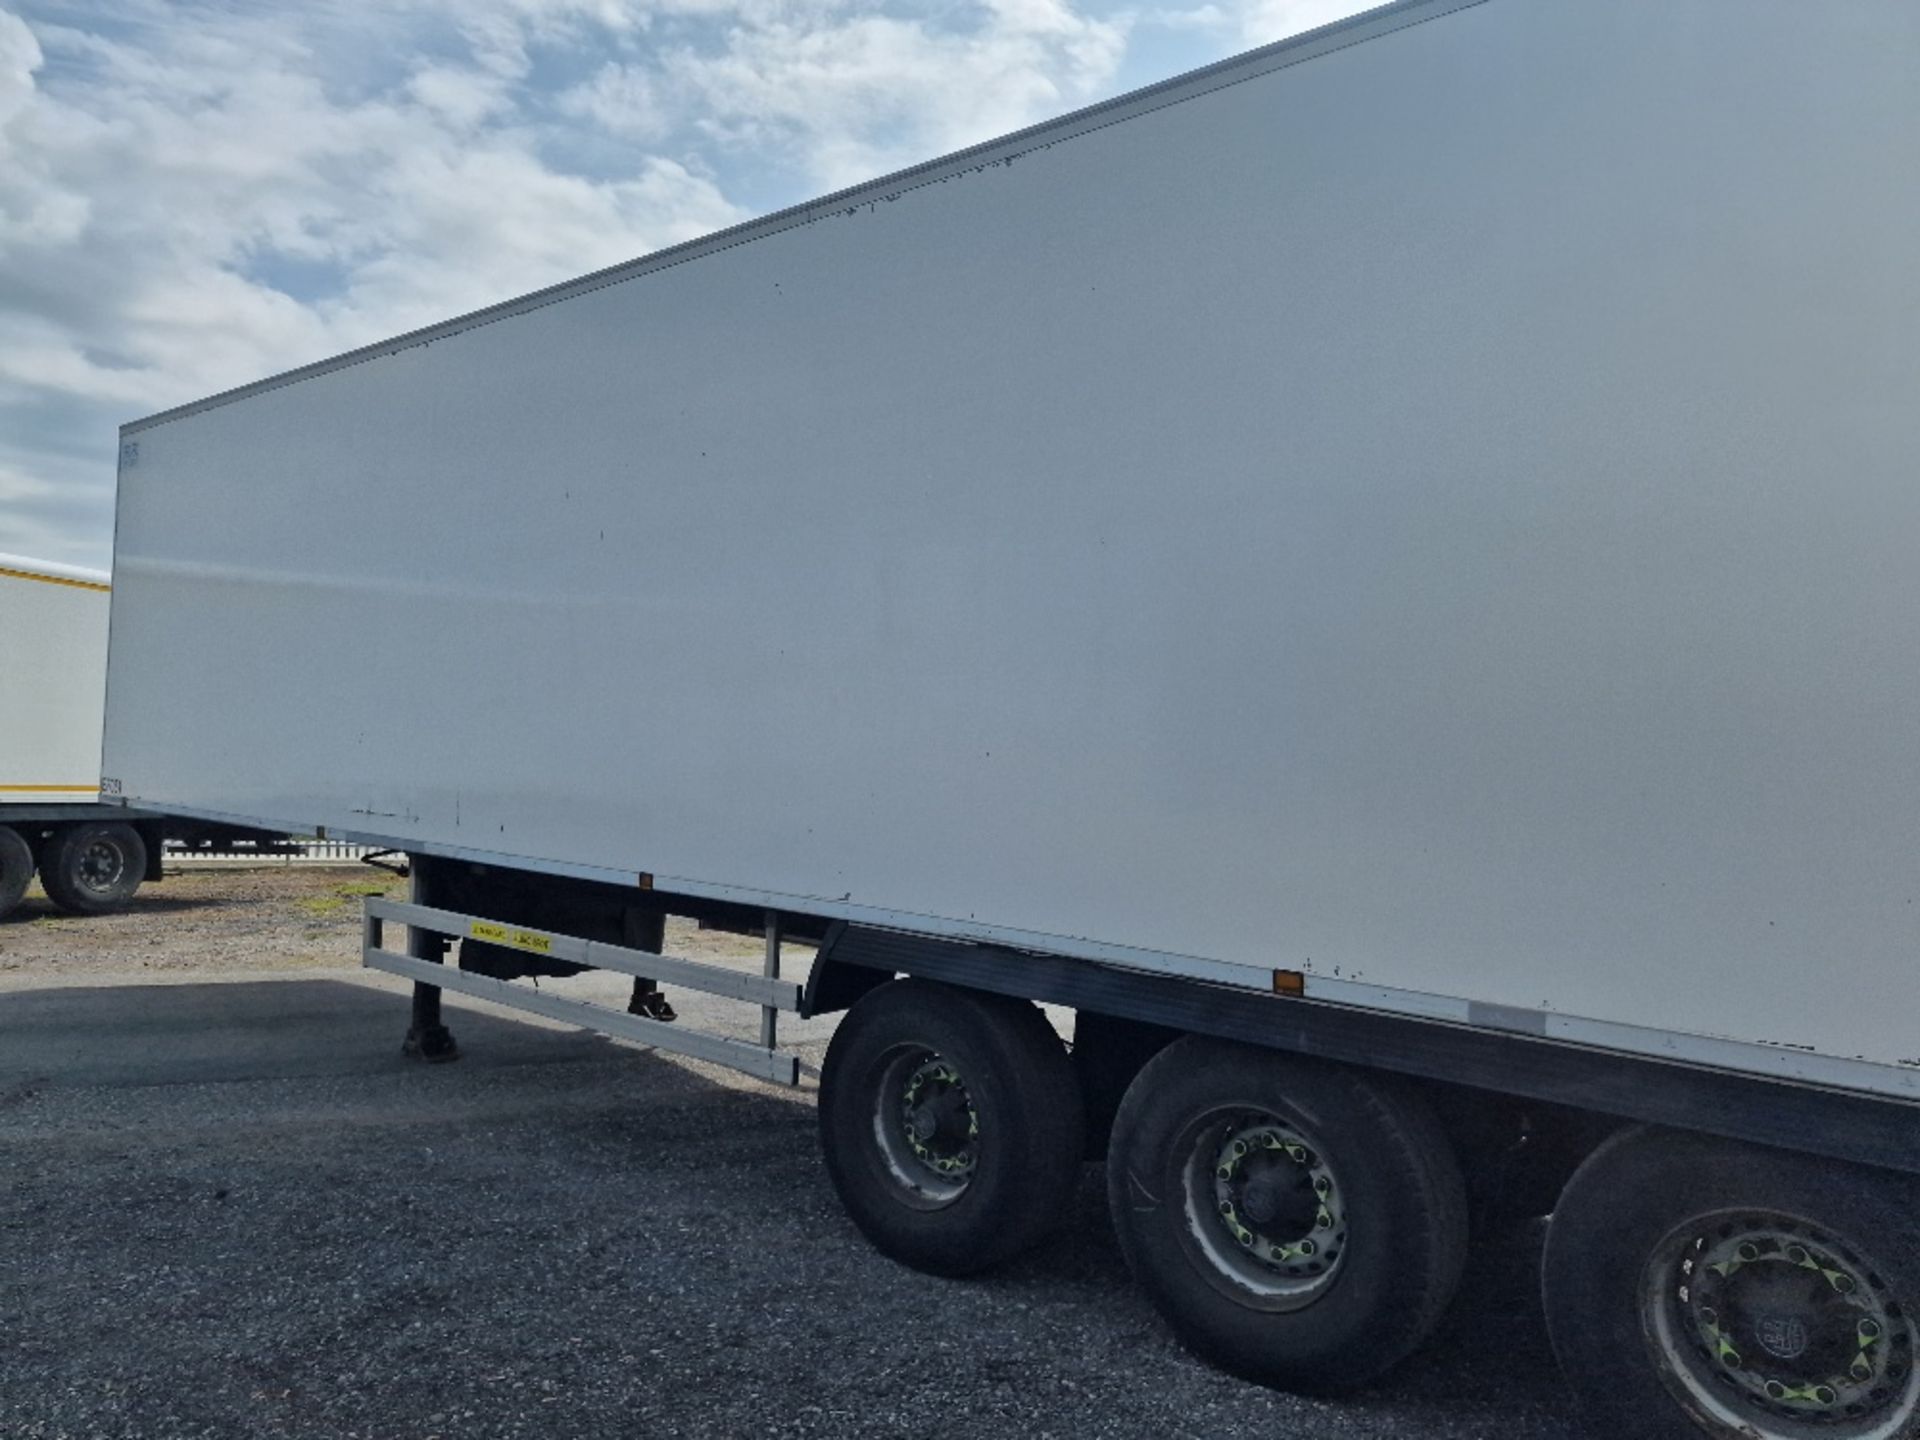 EF051 – 2015 Chereau 13.6m Refrigerated Trailer - Image 5 of 13